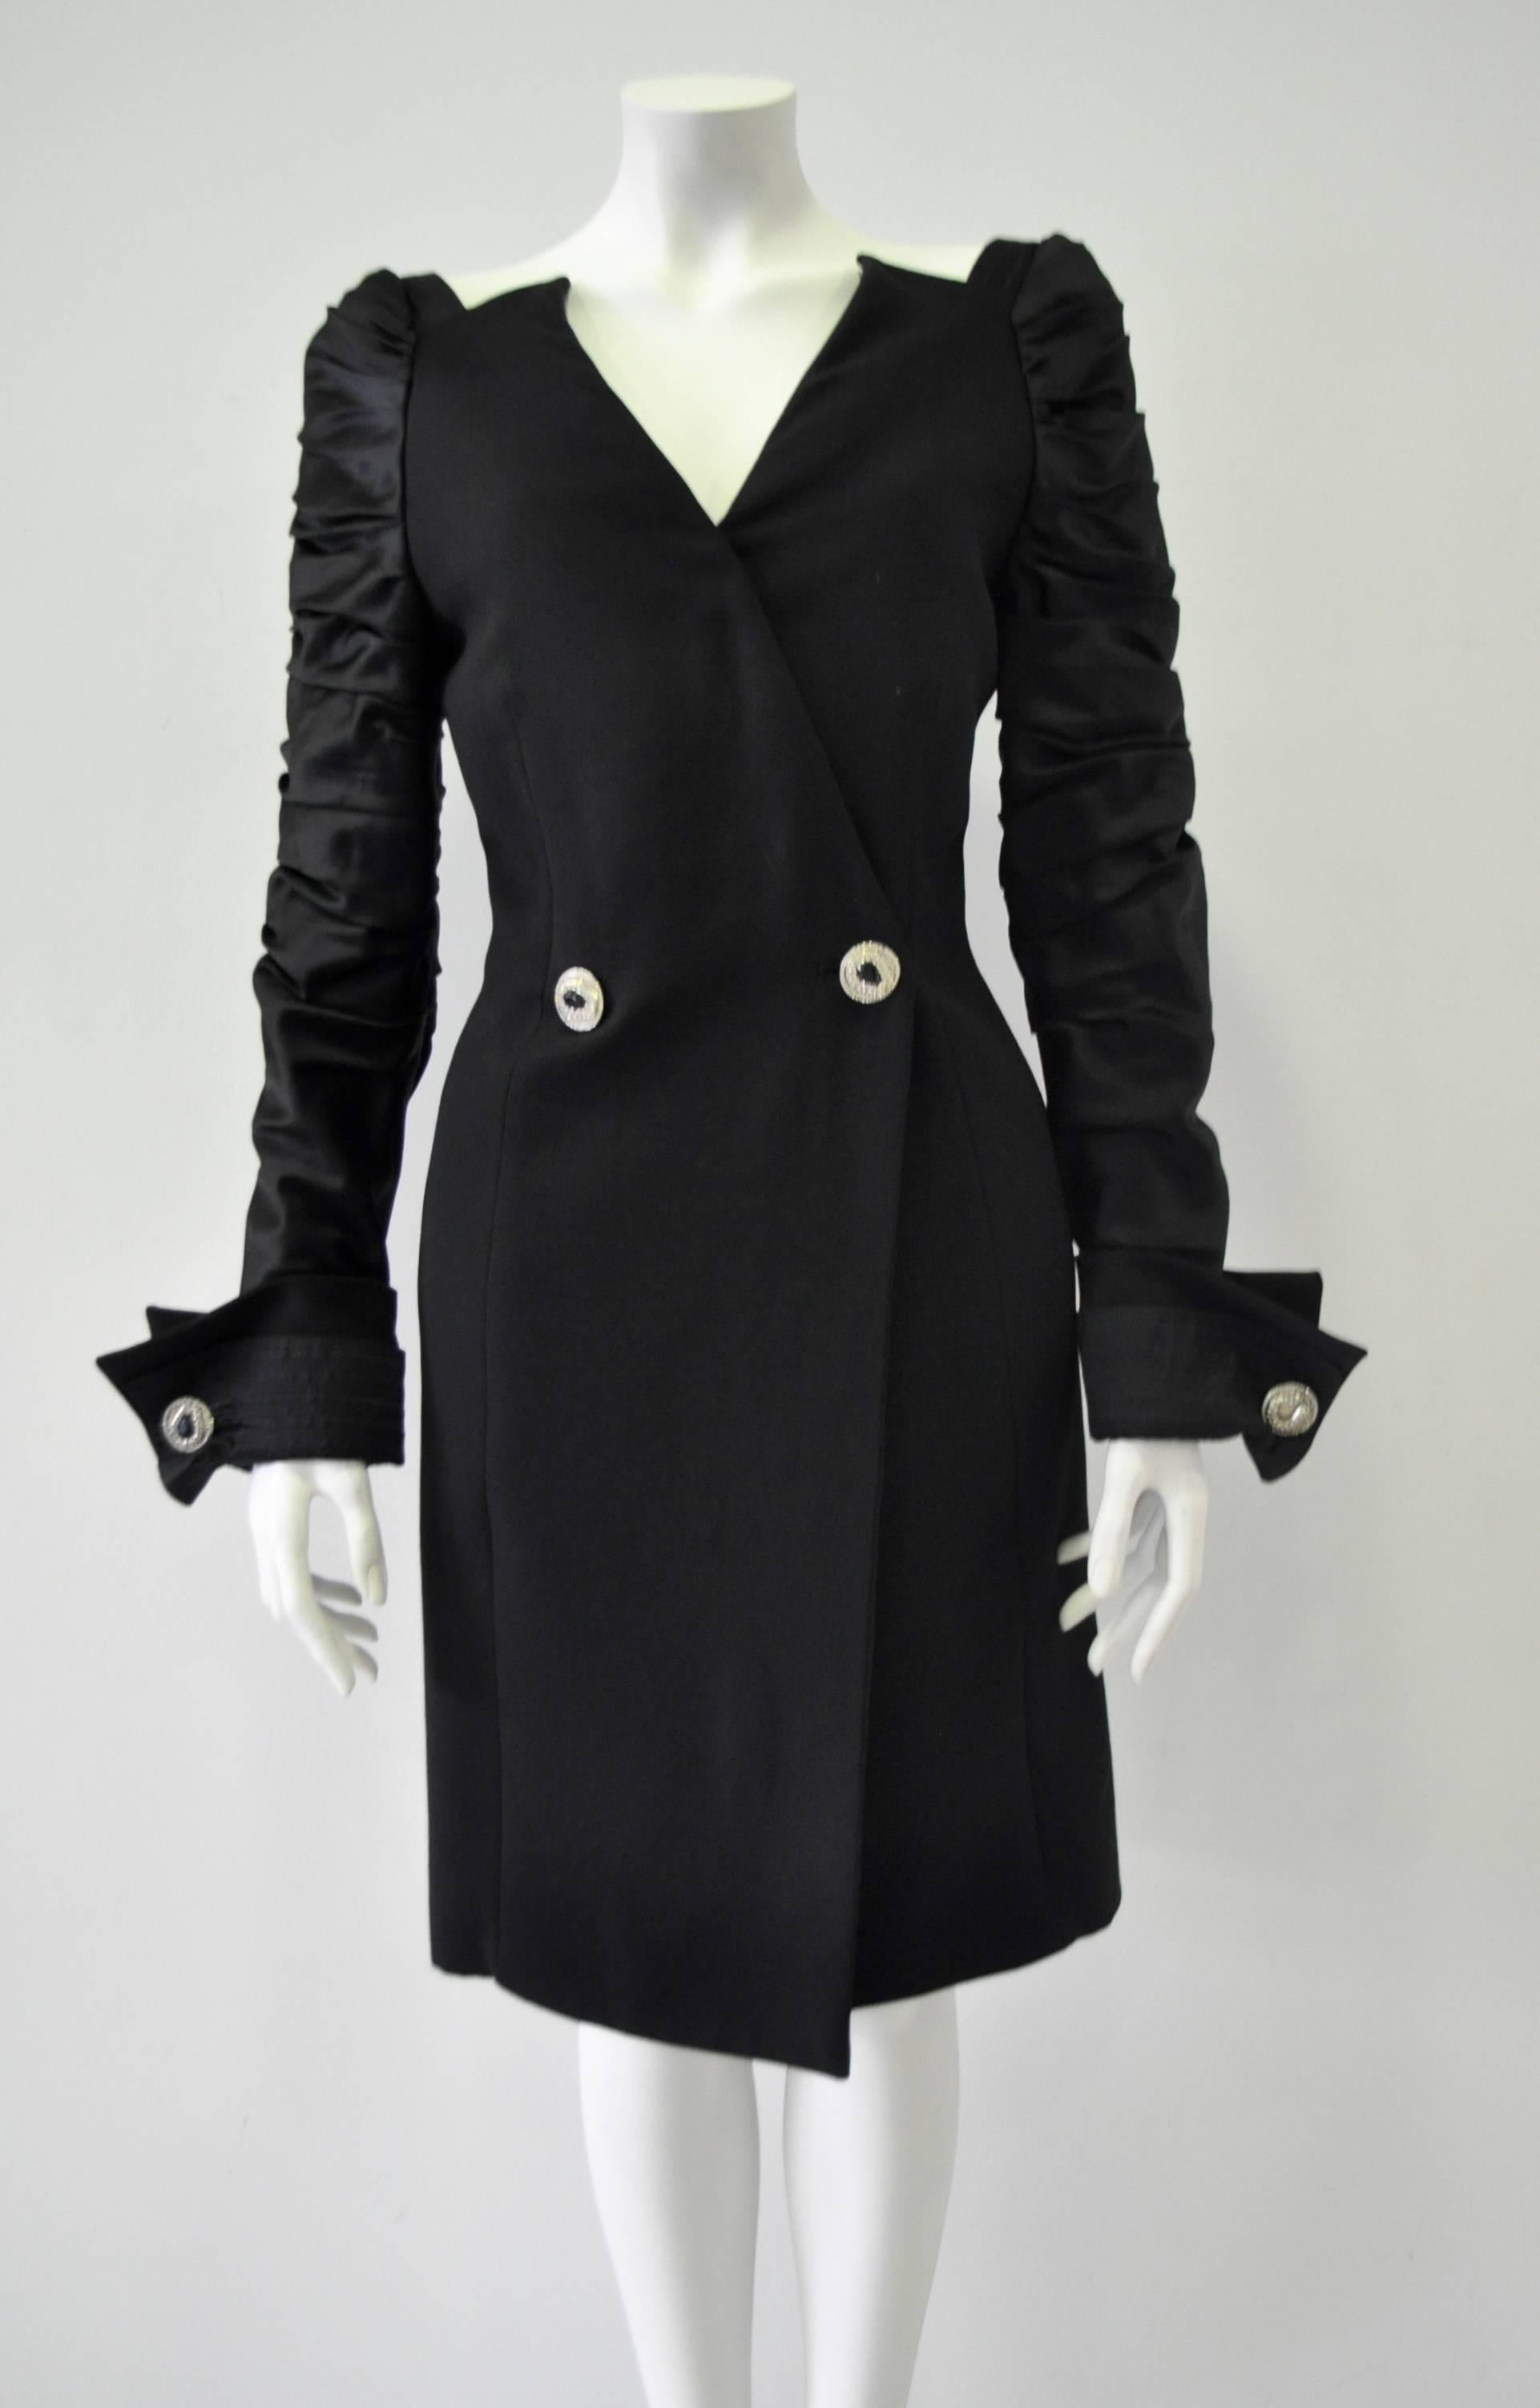 Commanding Gianni Versace Couture Cocktail Coat Dress Featuring Regal French Cuffs and Impressive Crystal Encrusted Button Cufflinks, Fall 1990